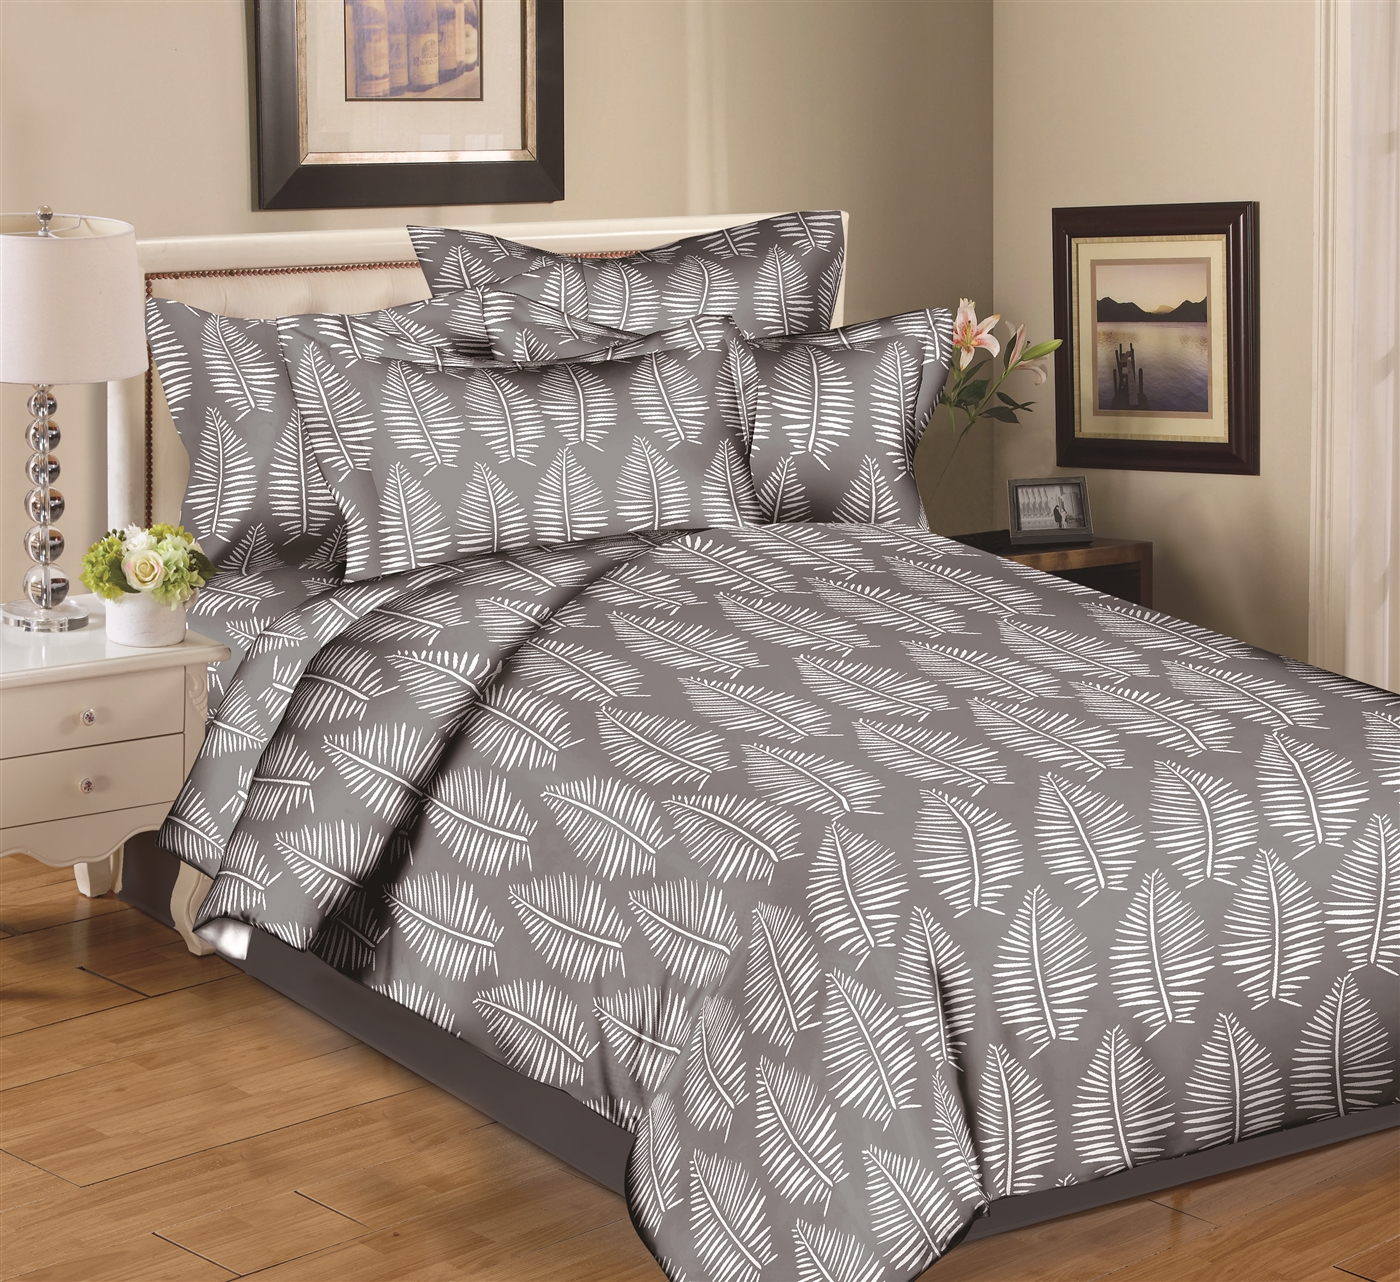 Better Bed Collection: Elm Leaves Gray 8PC Bedding Sets-200 Thread Count